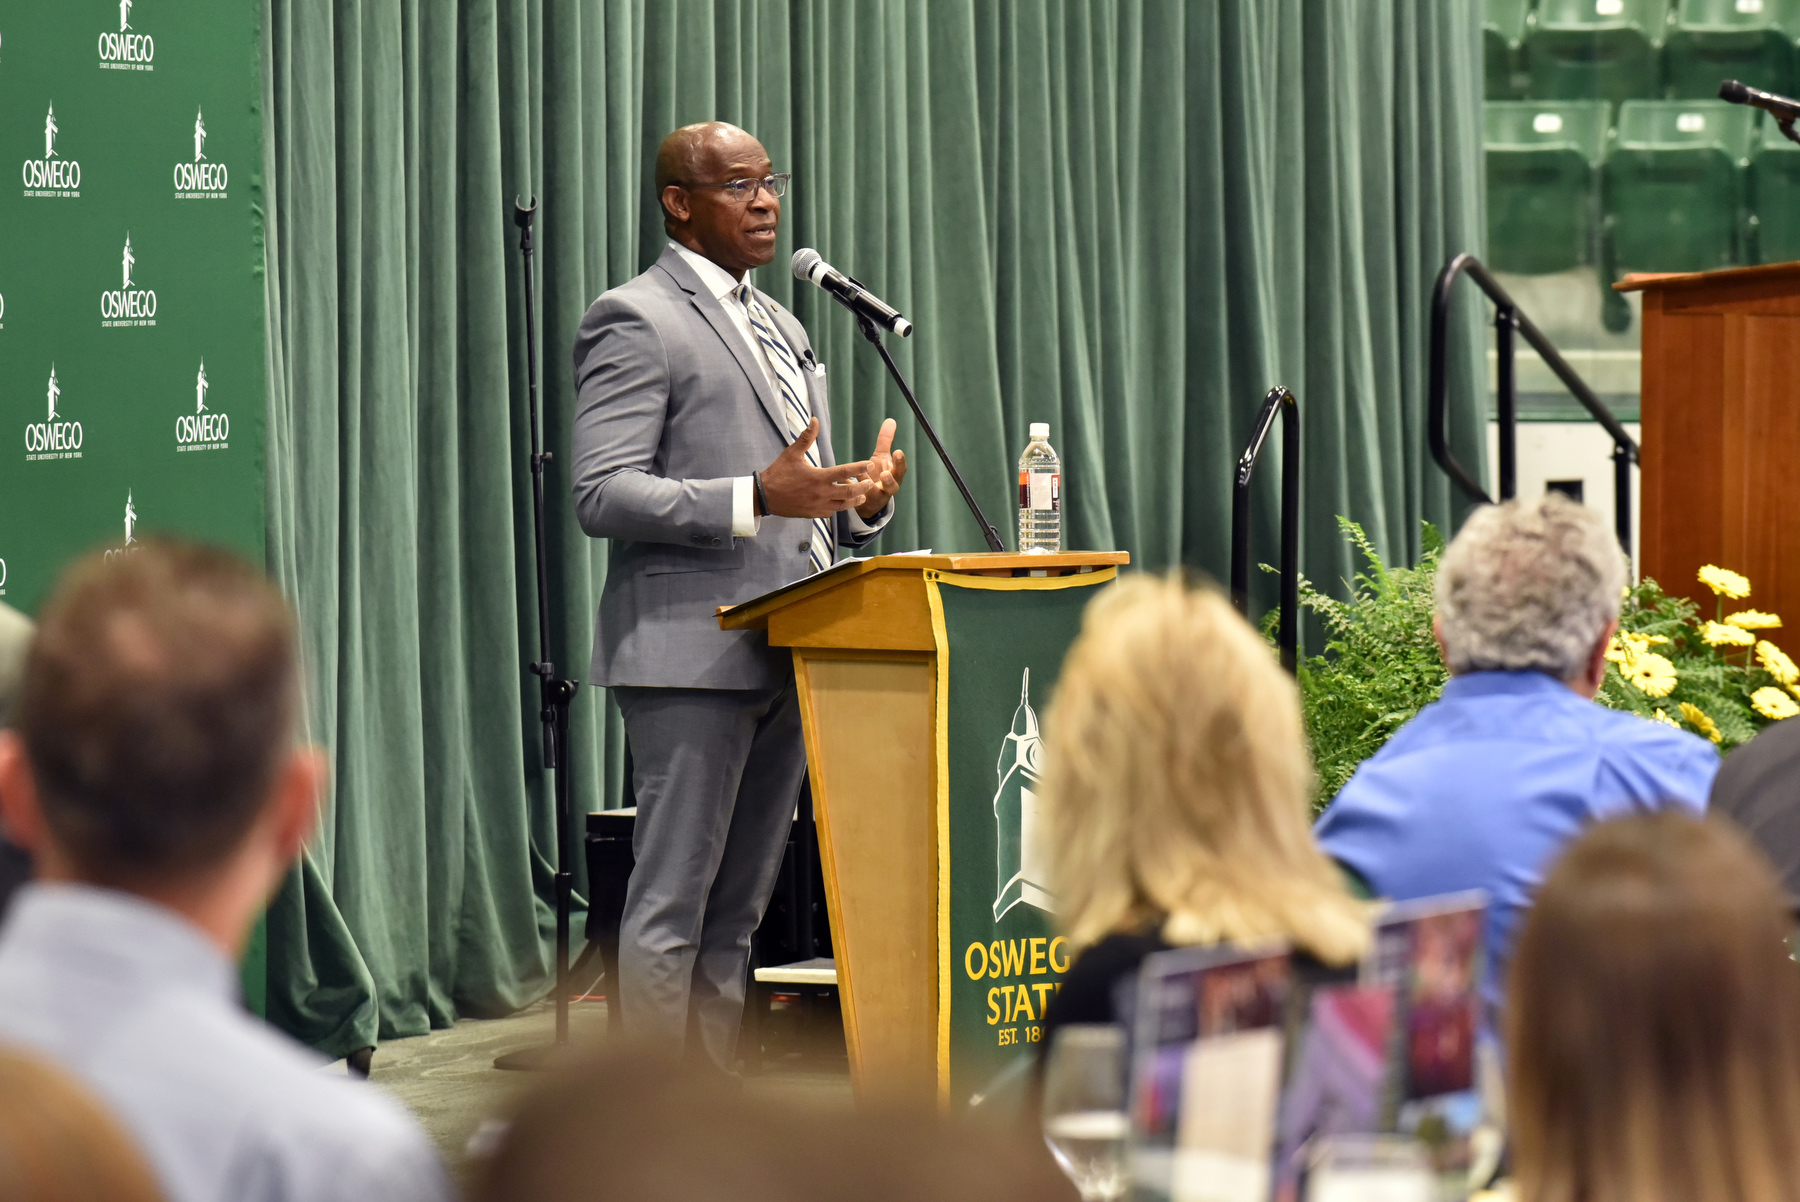 President Peter O. Nwosu welcomes faculty and staff during the annual Opening Breakfast at the beginning of the 2023-2024 academic year. The Aug. 22 breakfast was held in Deborah F. Stanley Arena and Convocation Hall, Marano Campus Center.